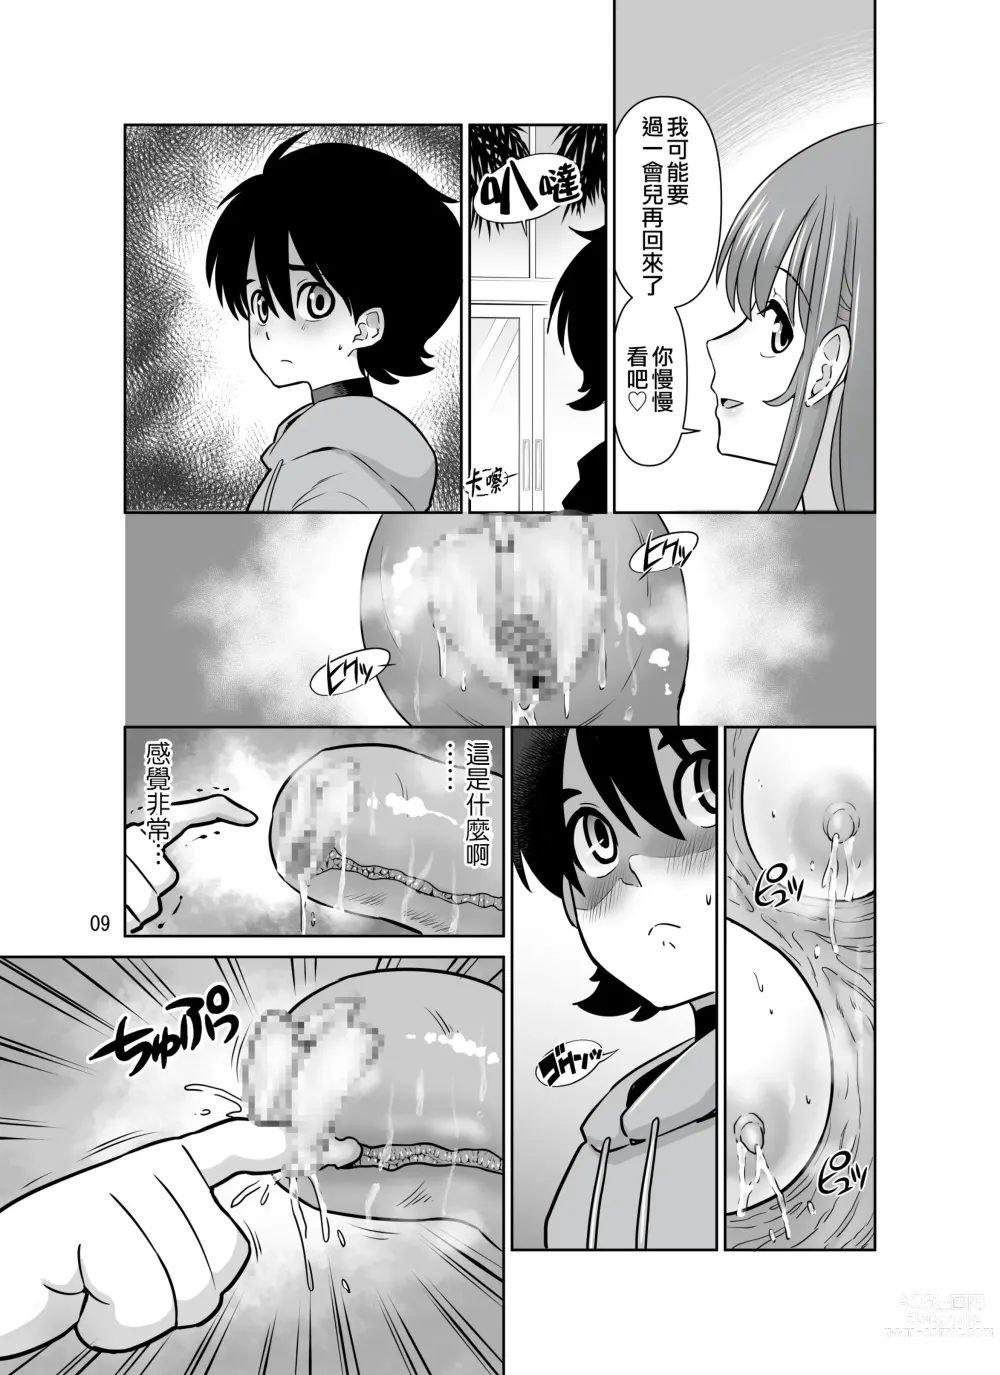 Page 9 of doujinshi 触手花店的大姐姐